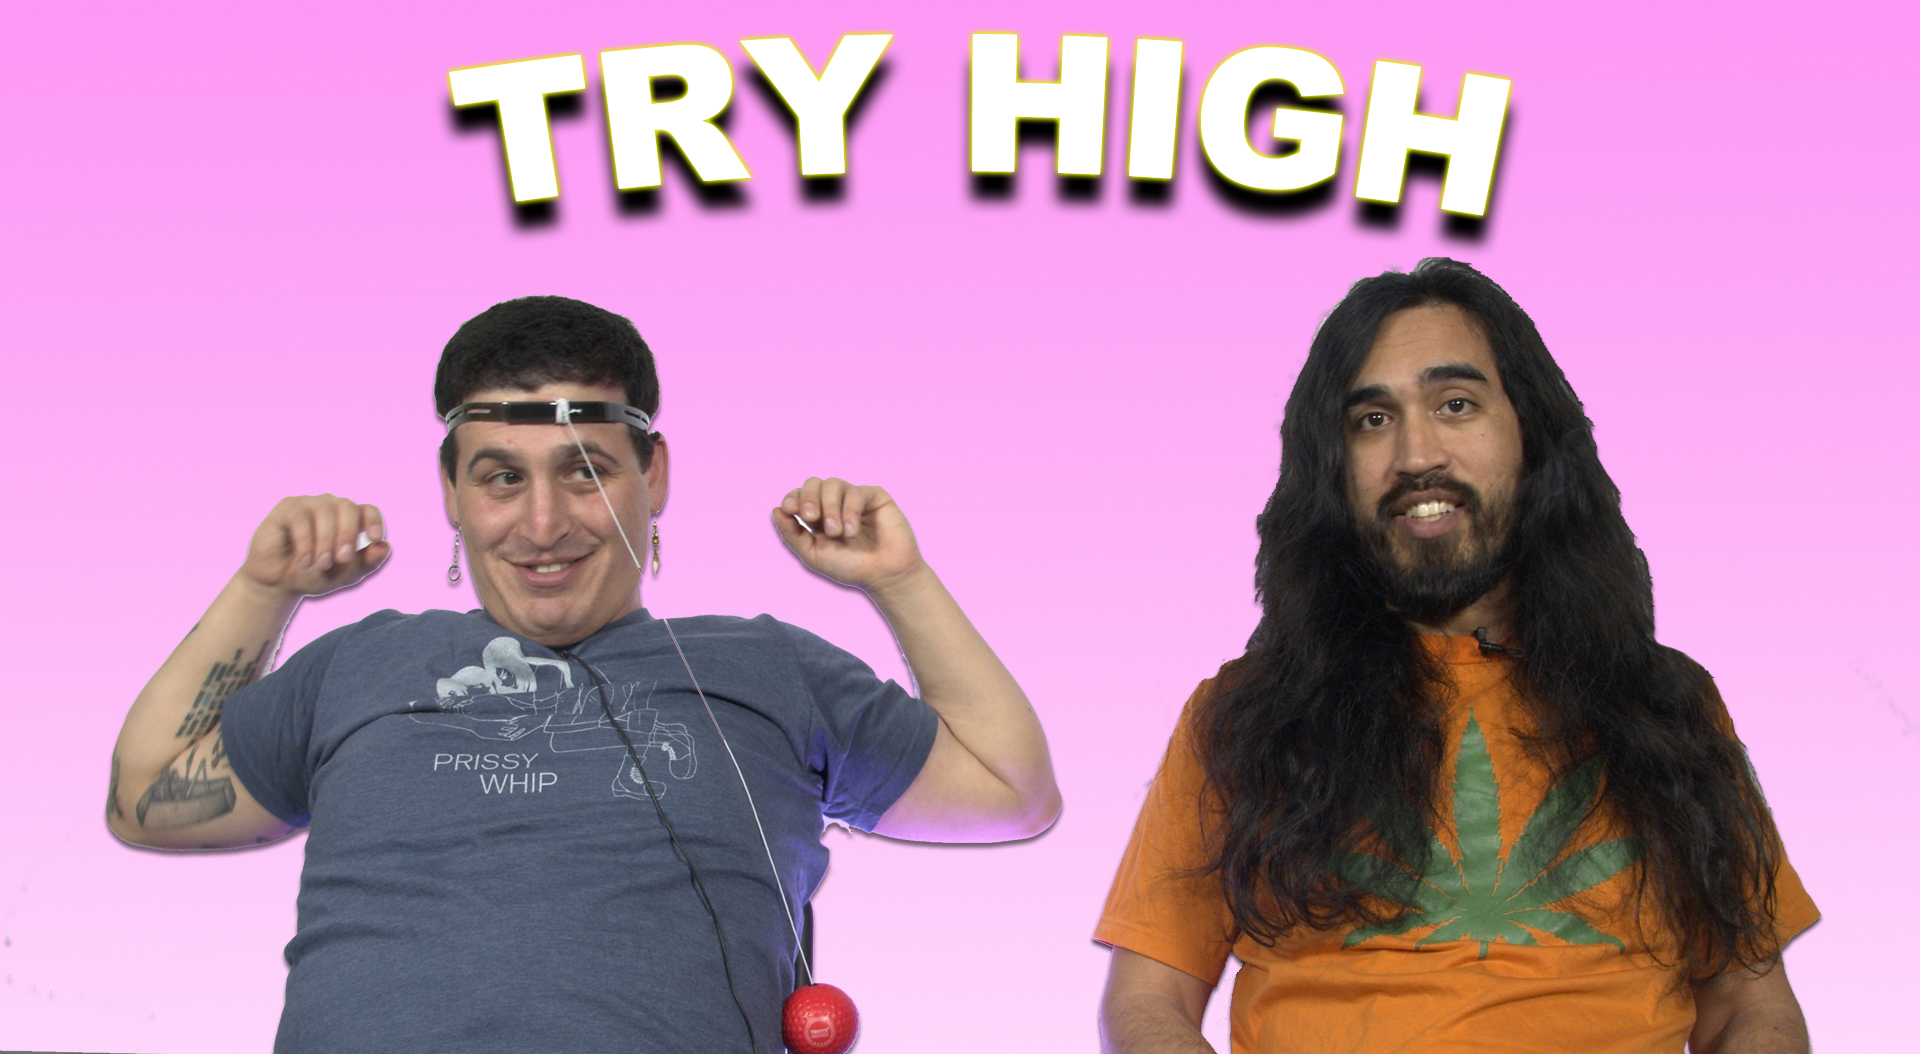 Makal and Dalton Get Lit and Test Their Boxing Skills | TRY HIGH